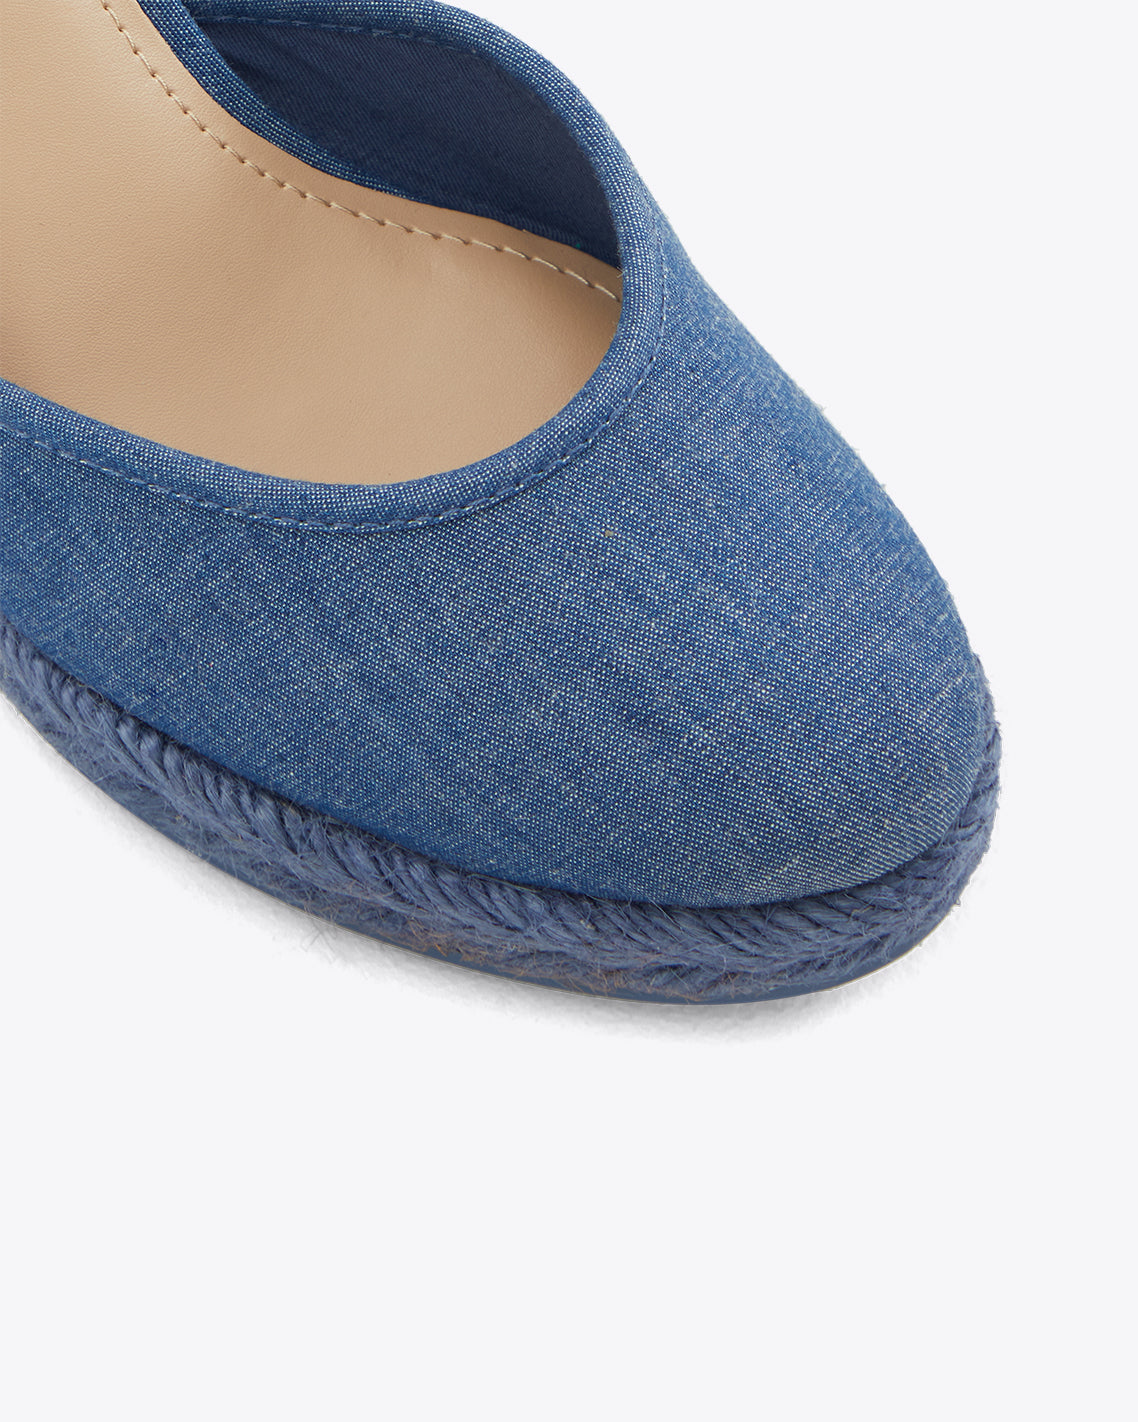 Olivia Espadrille Wedges in Chambray